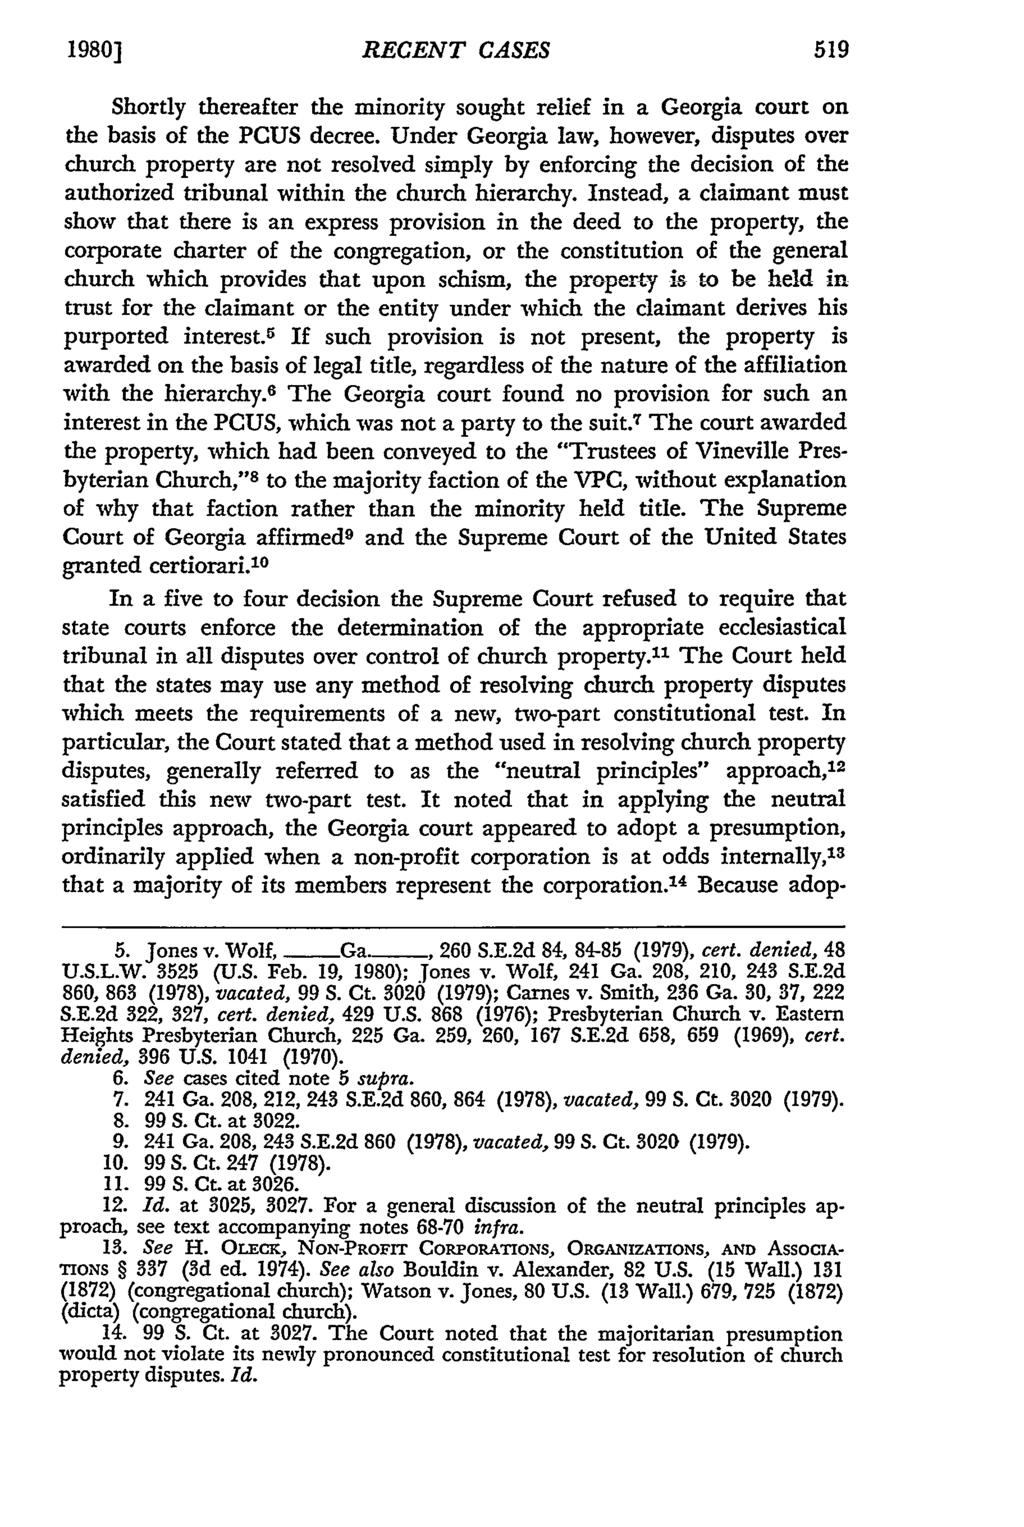 1980] Missouri Law RECENT Review, Vol. CASES 45, Iss. 3 [1980], Art. 8 Shortly thereafter the minority sought relief in a Georgia court on the basis of the PCUS decree.